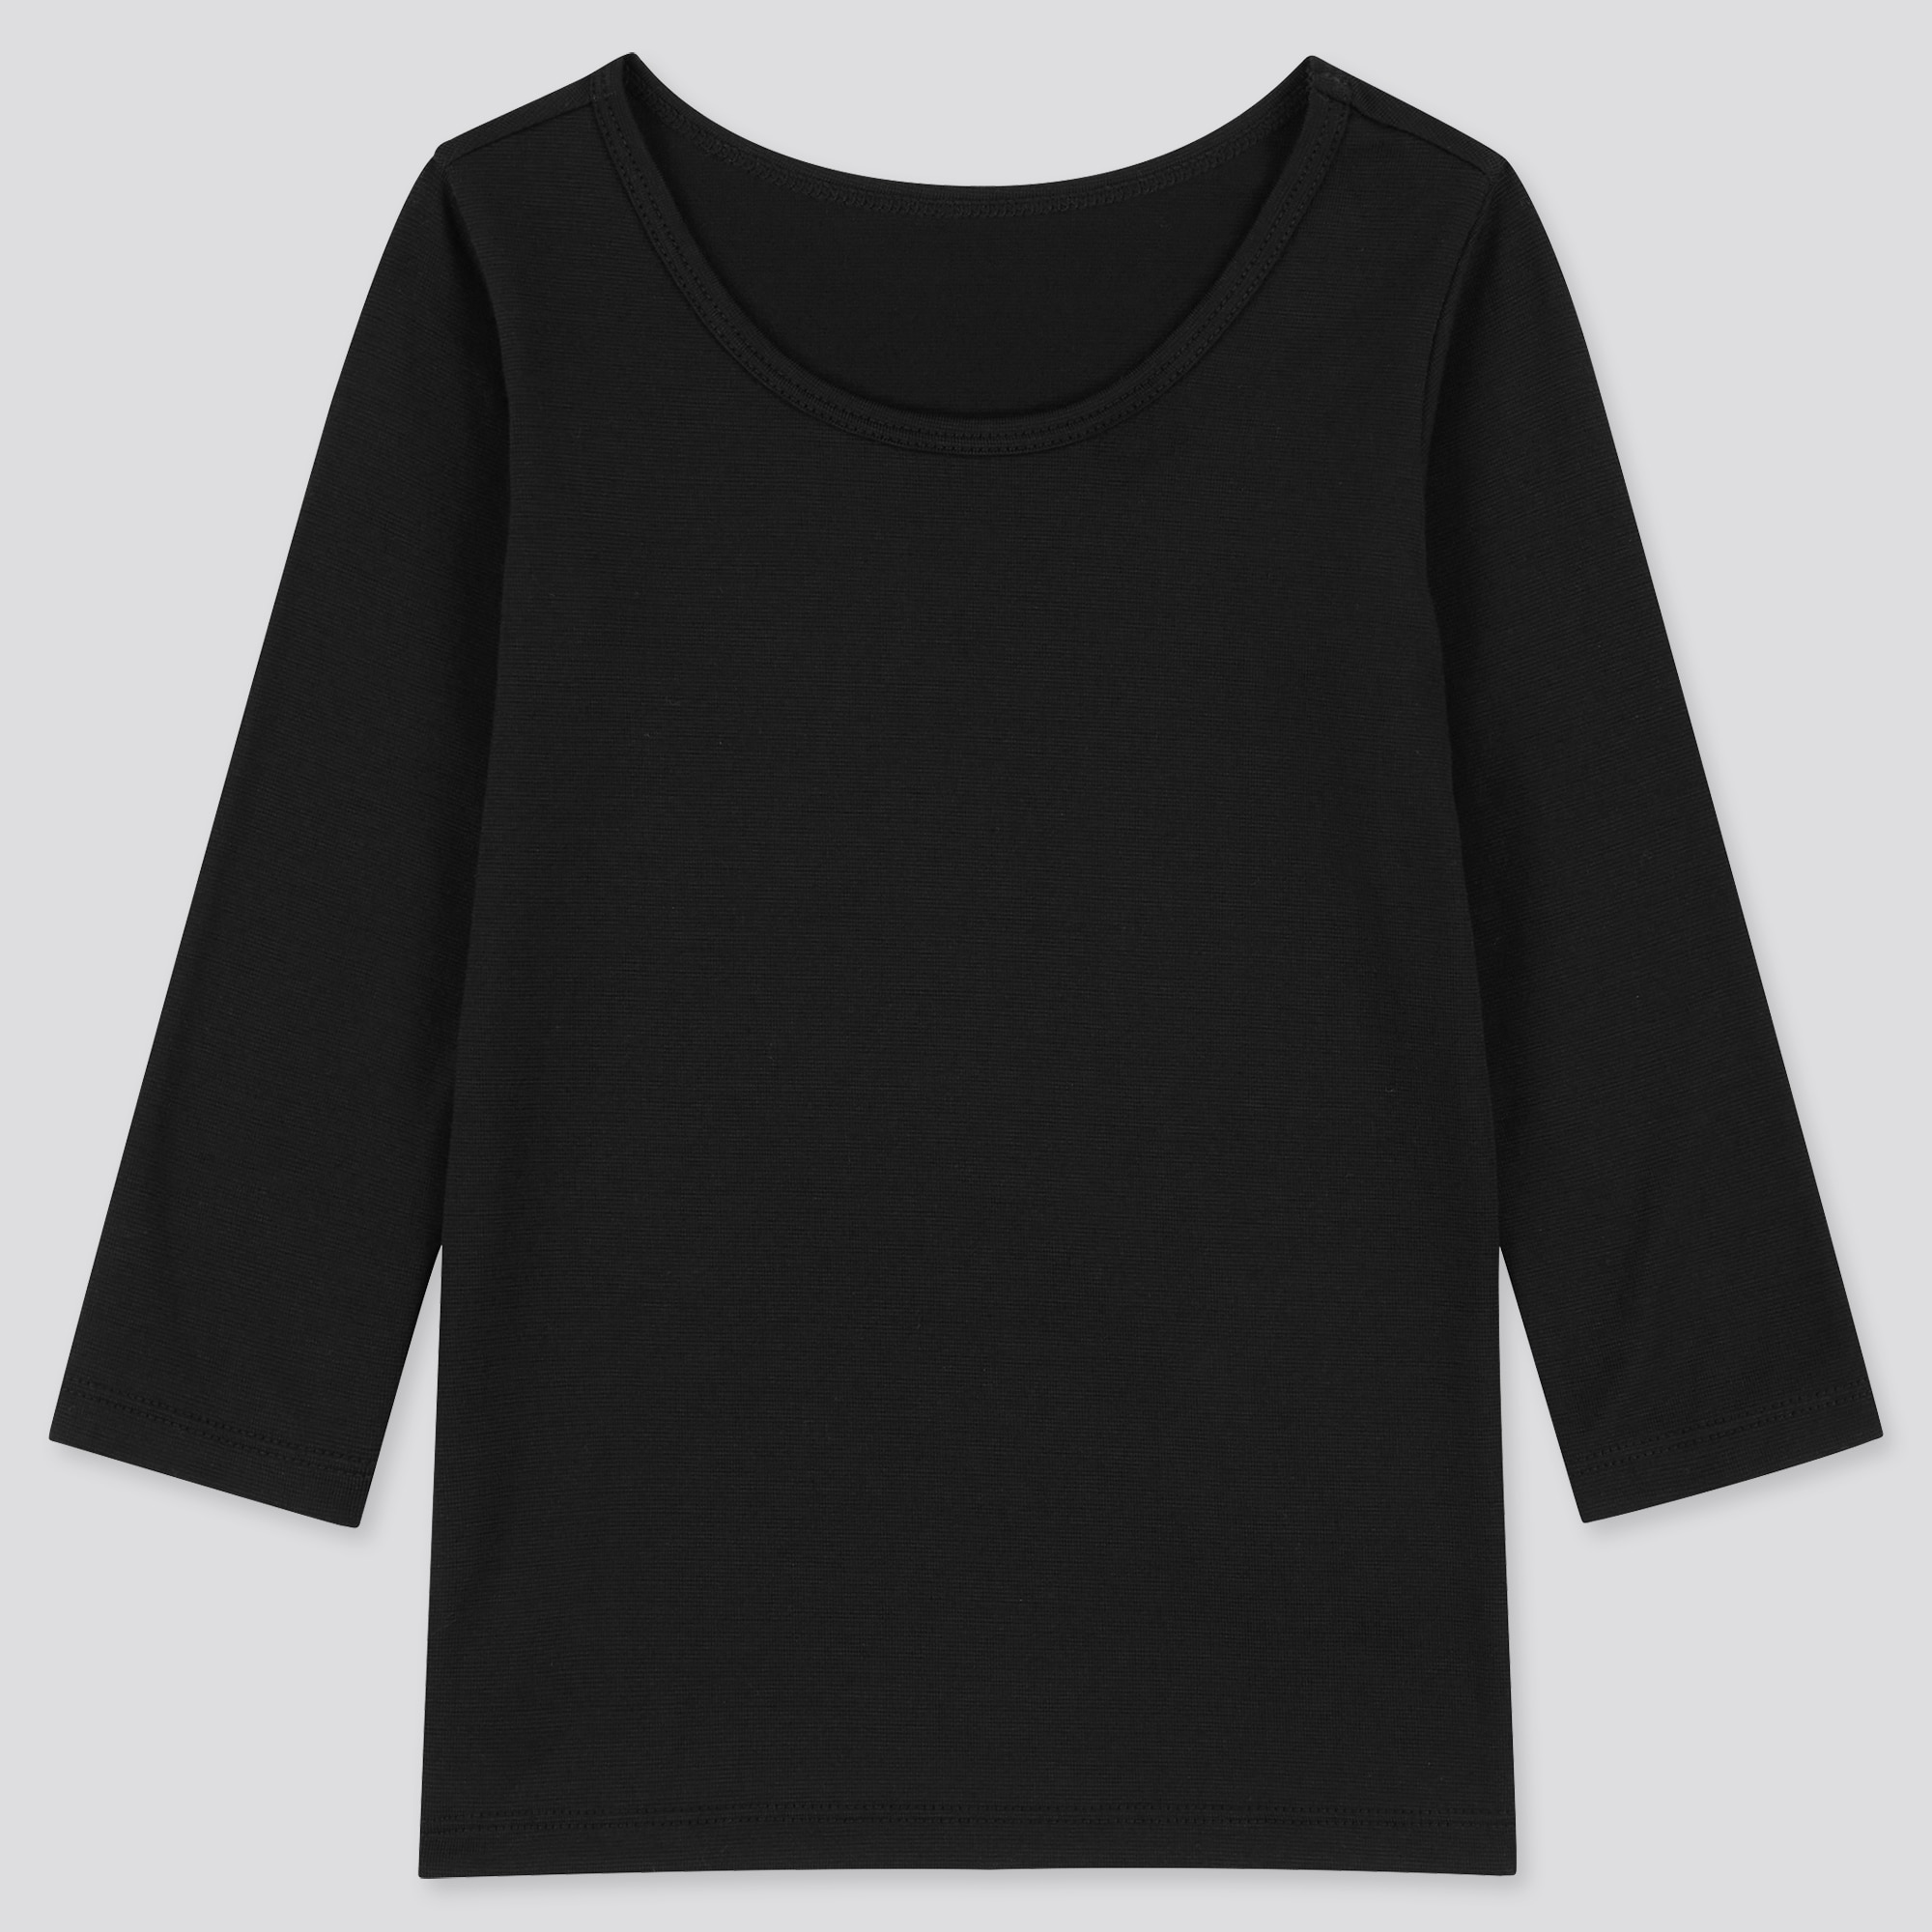 UNIQLO Warm Cotton Stretch Scoop Neck Long-Sleeve T-Shirt | StyleHint